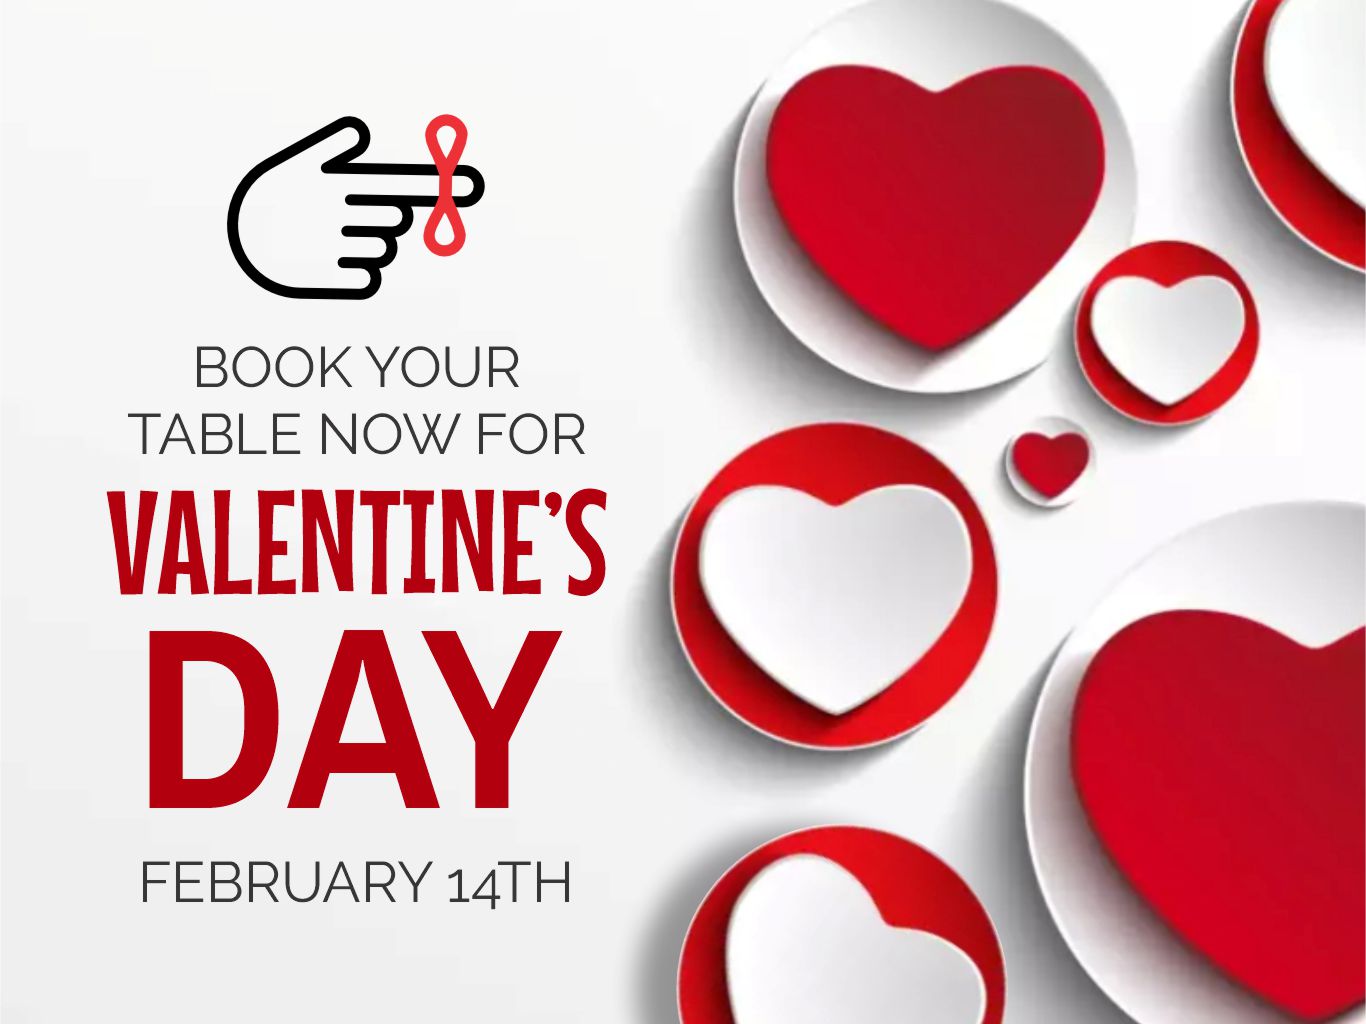 Book for Valentine's Day